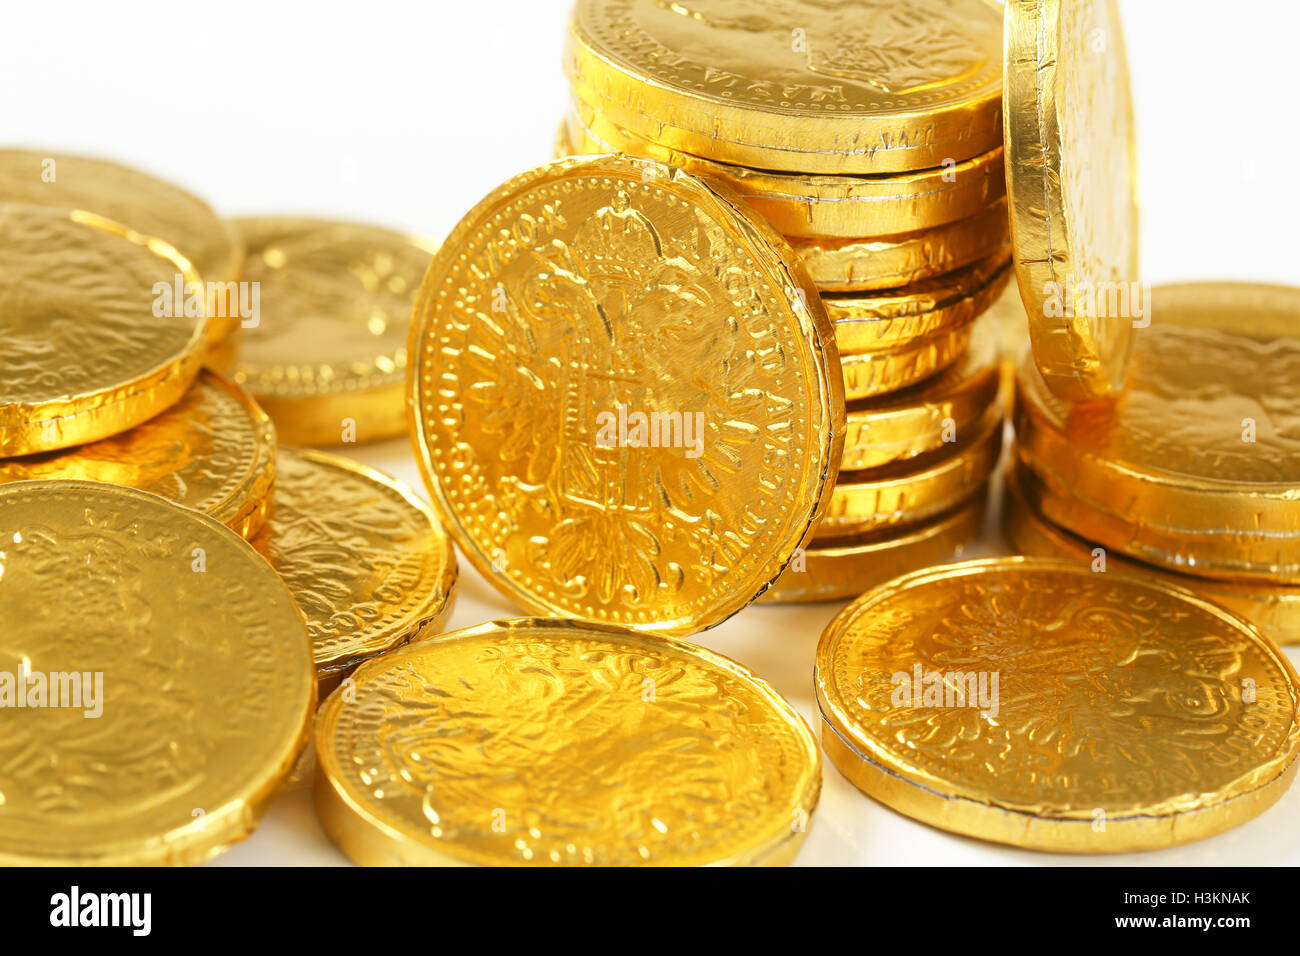 detail of golden chocolate coins stack Stock Photo